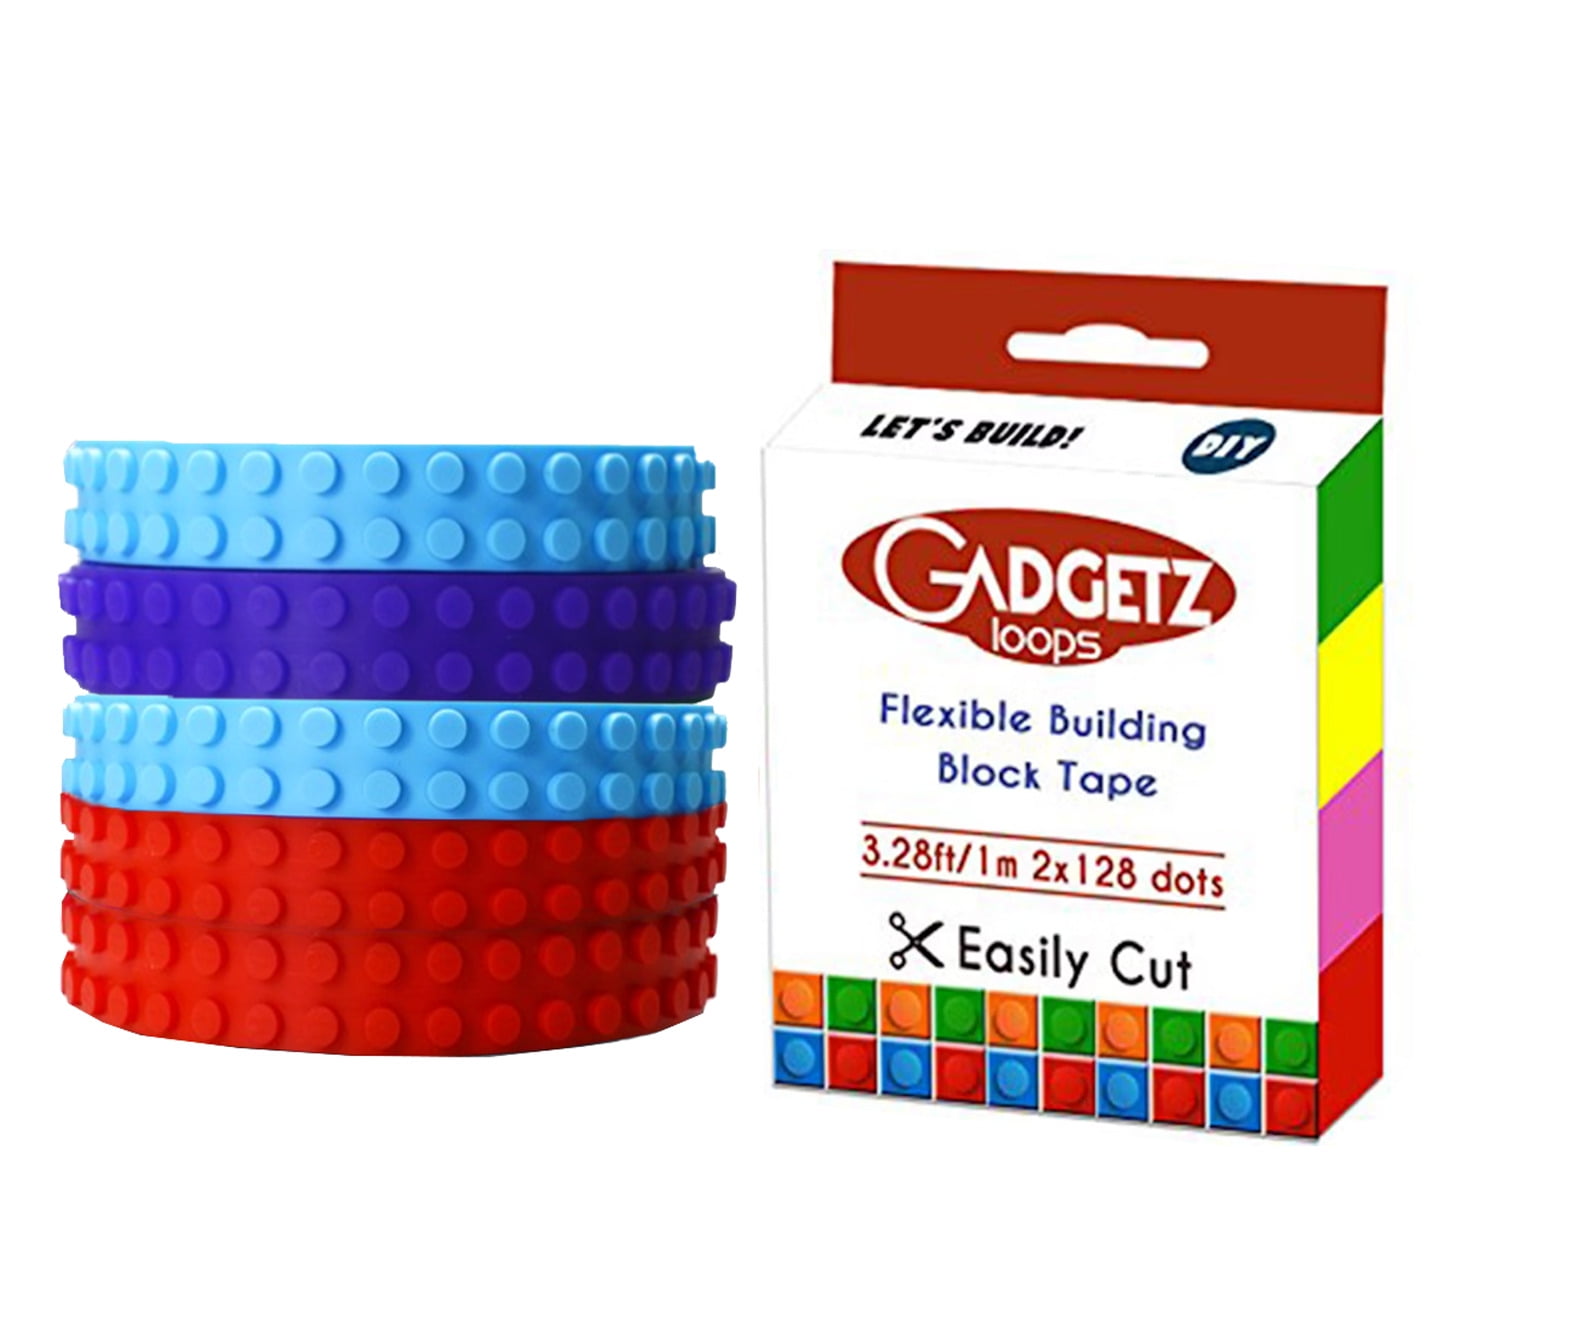 As Seen On TV, Toys, New Bonanza Building Block Lego Tape 4 Pack Of 3 Ft  Rolls Works Wtop Brands